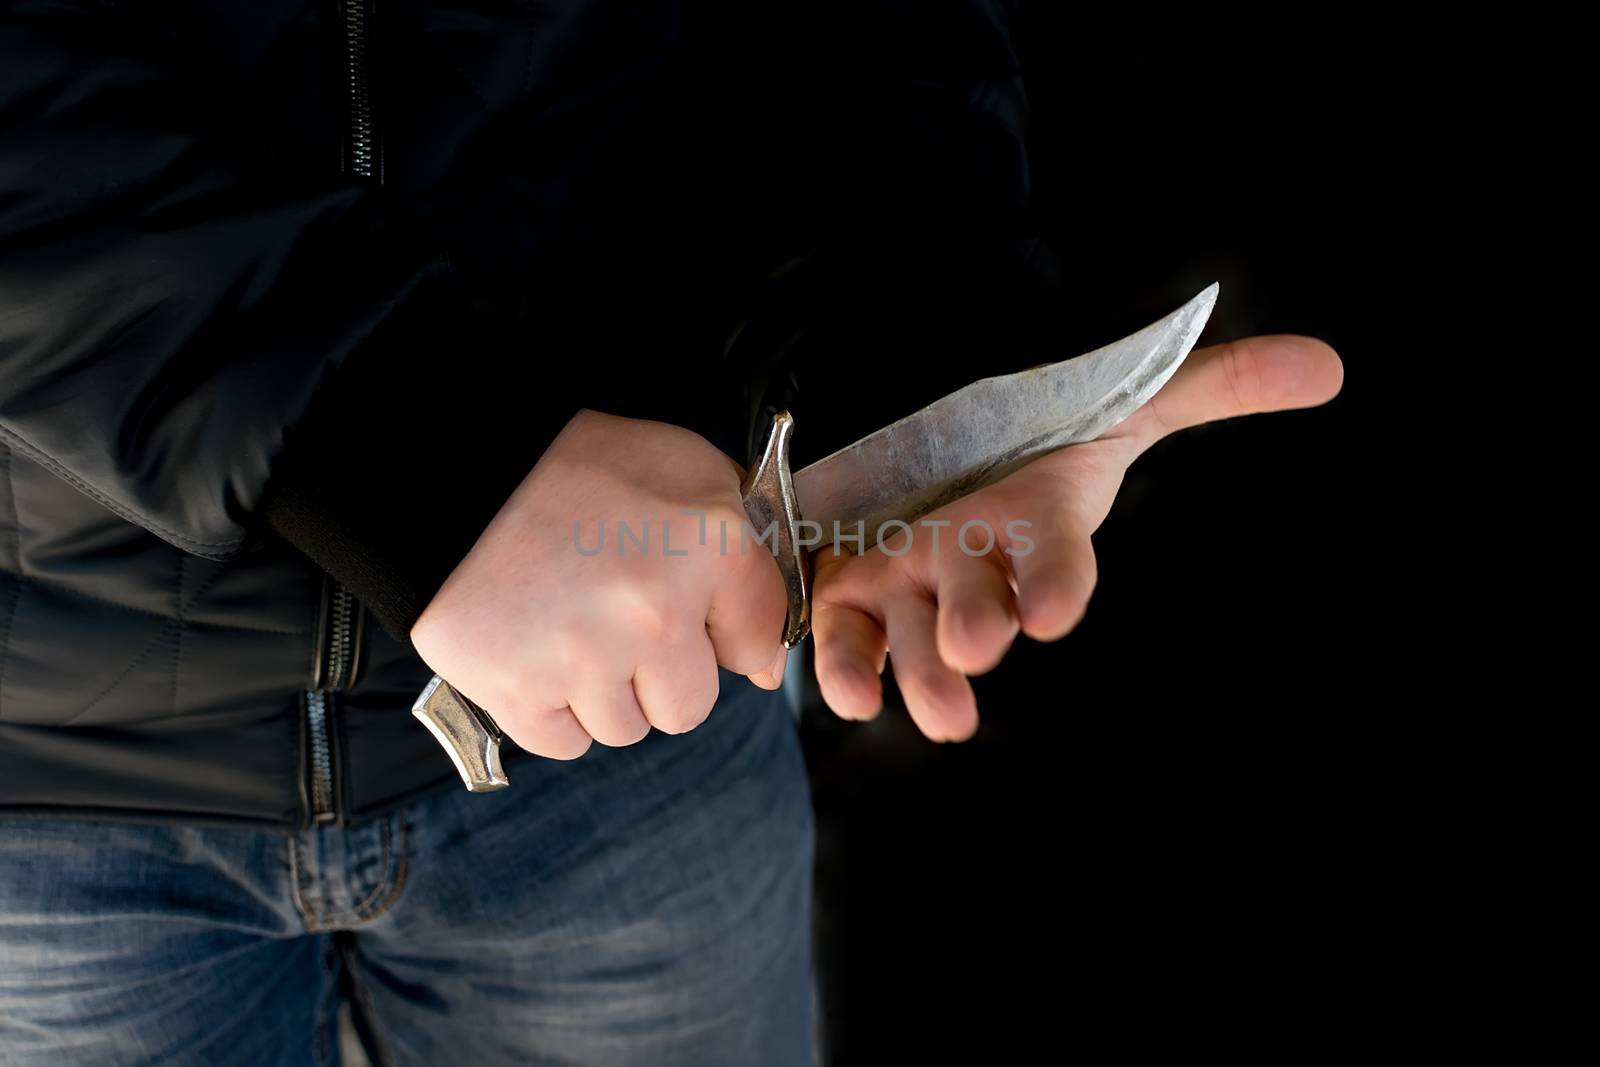 Crime, a man in a leather jacket and jeans in a dark room defiantly cuts his hand with a knife